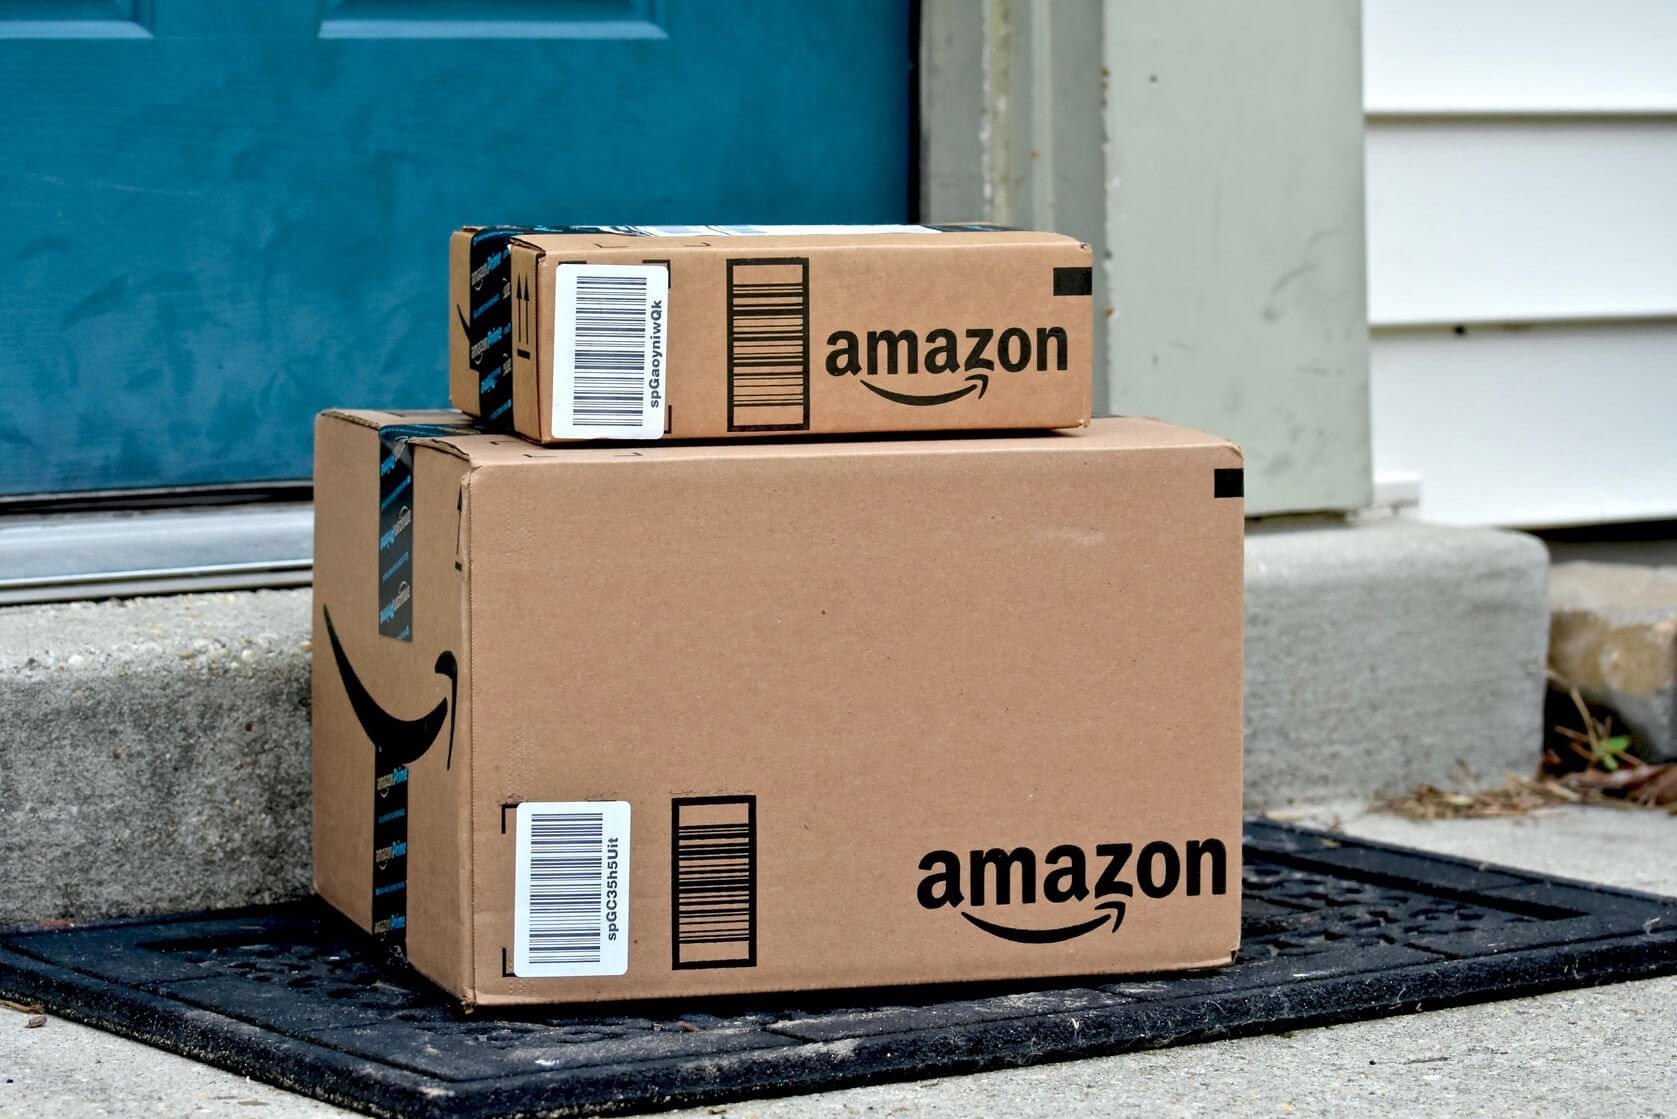 Amazon's upcoming 'Amazon Day' delivery option lets Prime members schedule their shipments